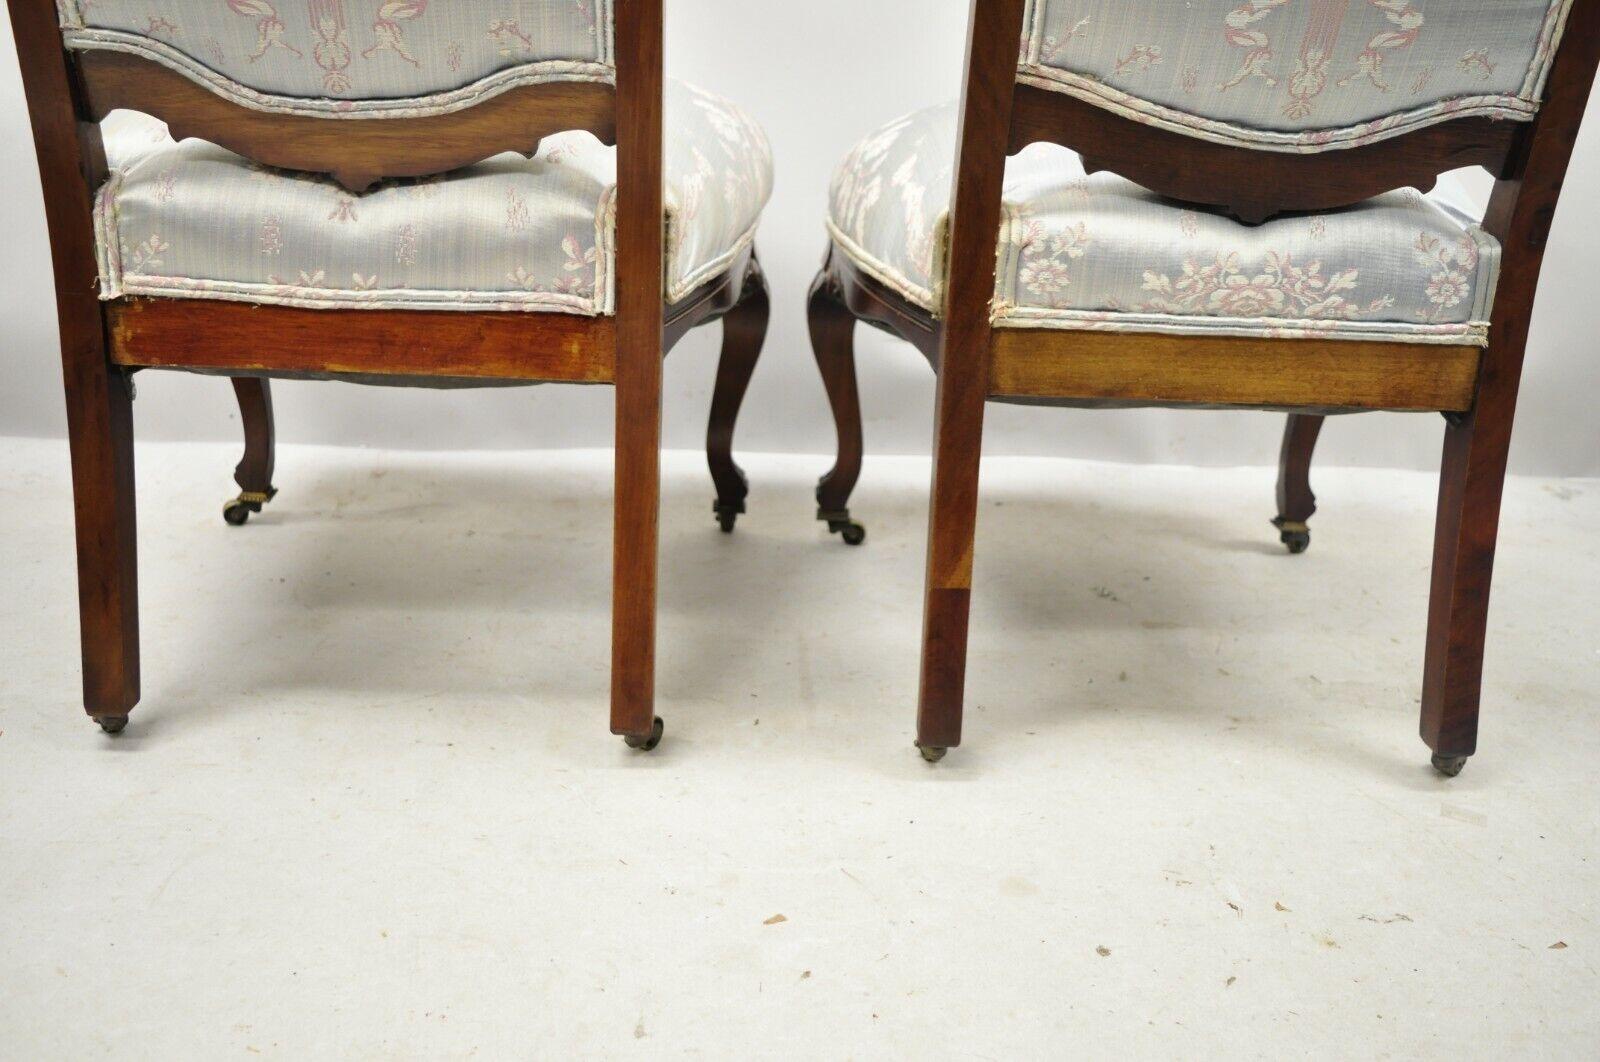 Antique Victorian Floral Scrollwork Carved Mahogany Parlor Side Chairs, a Pair 2